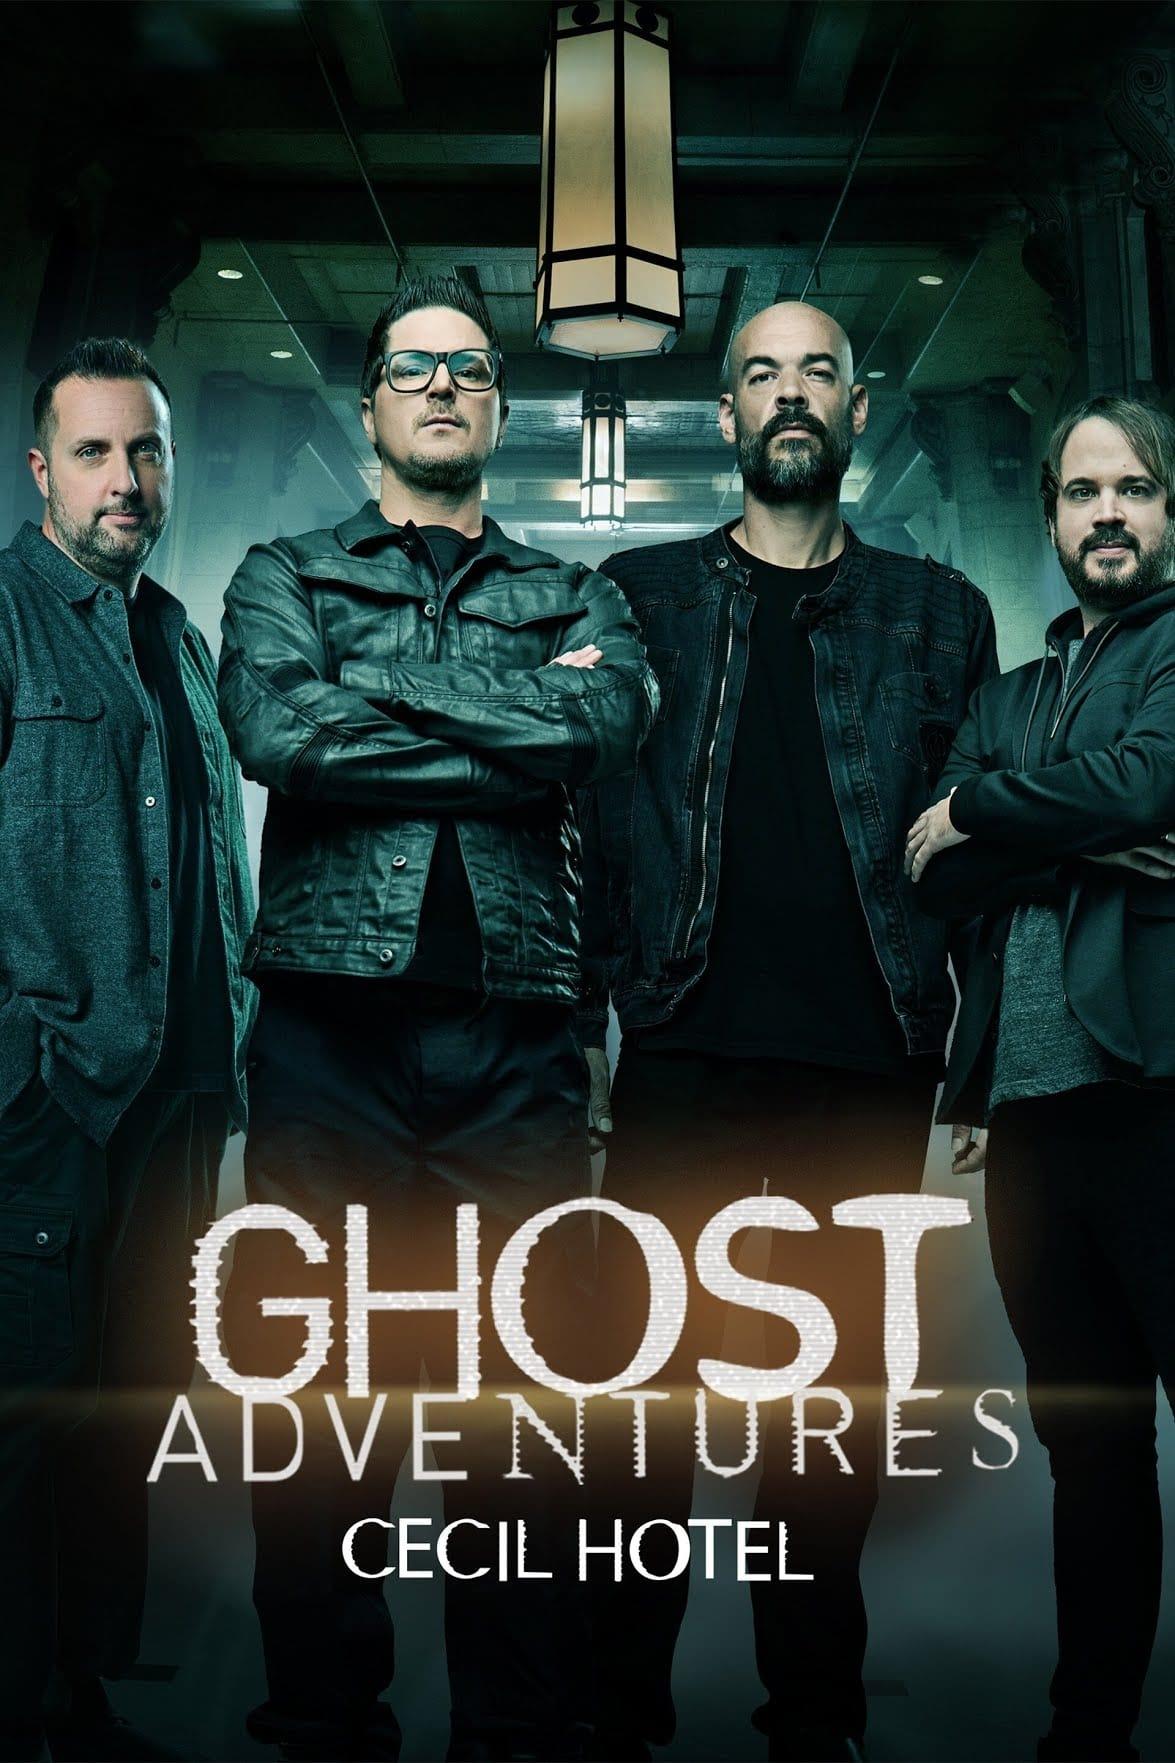 Ghost Adventures: Cecil Hotel poster